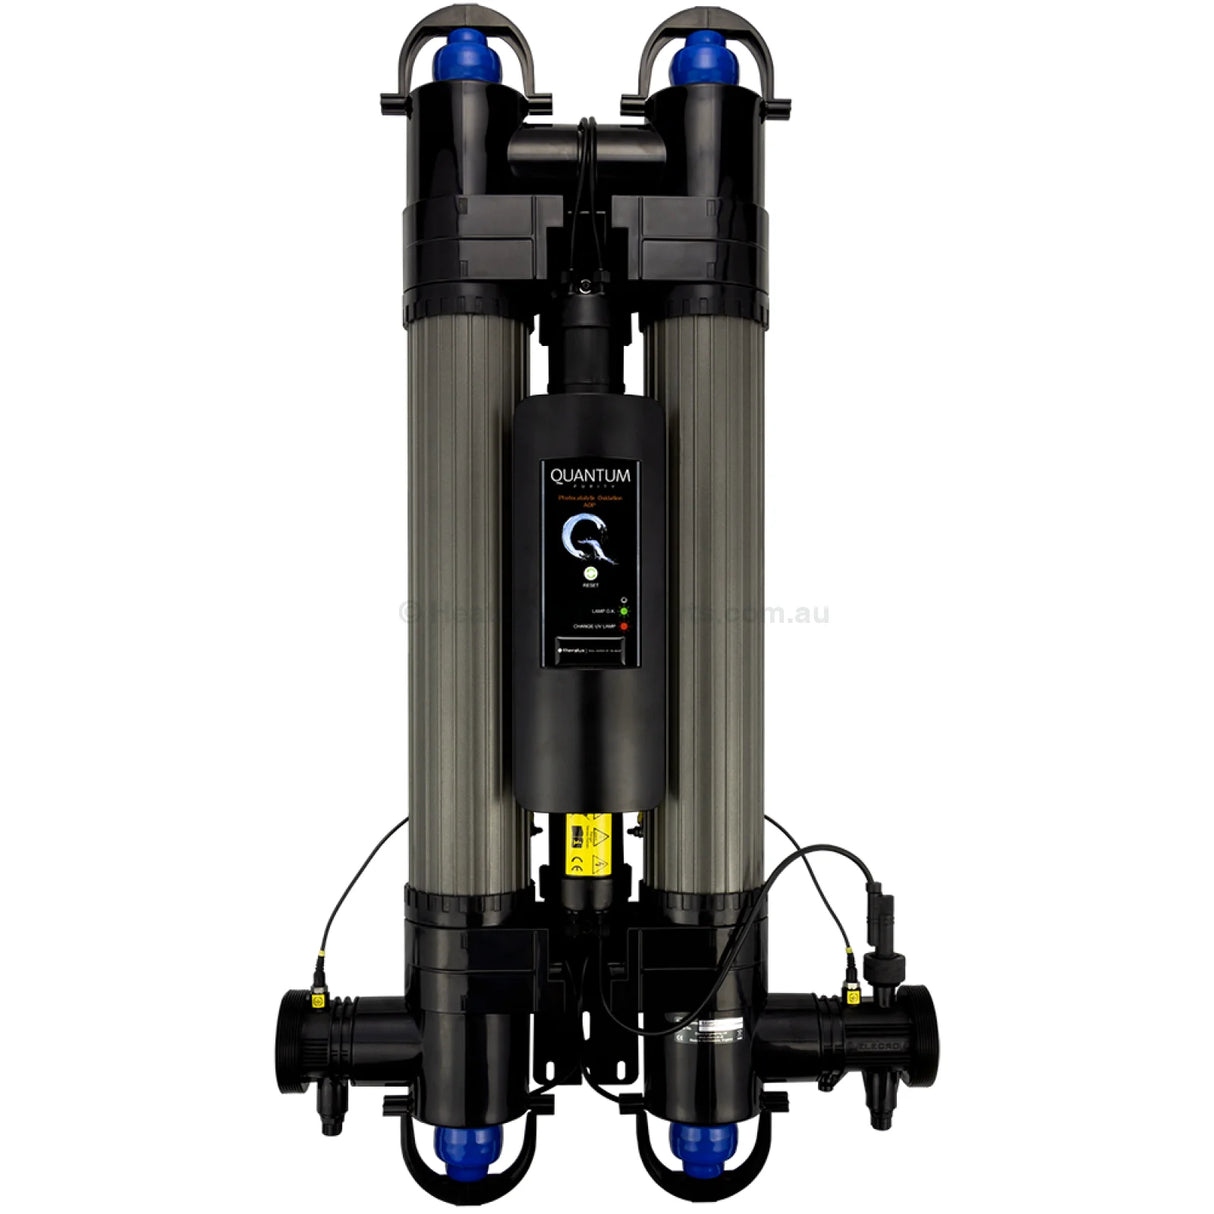 Theralux Elecro Quantum Photocatalytic Oxidisation Water Treatment - Heater and Spa Parts